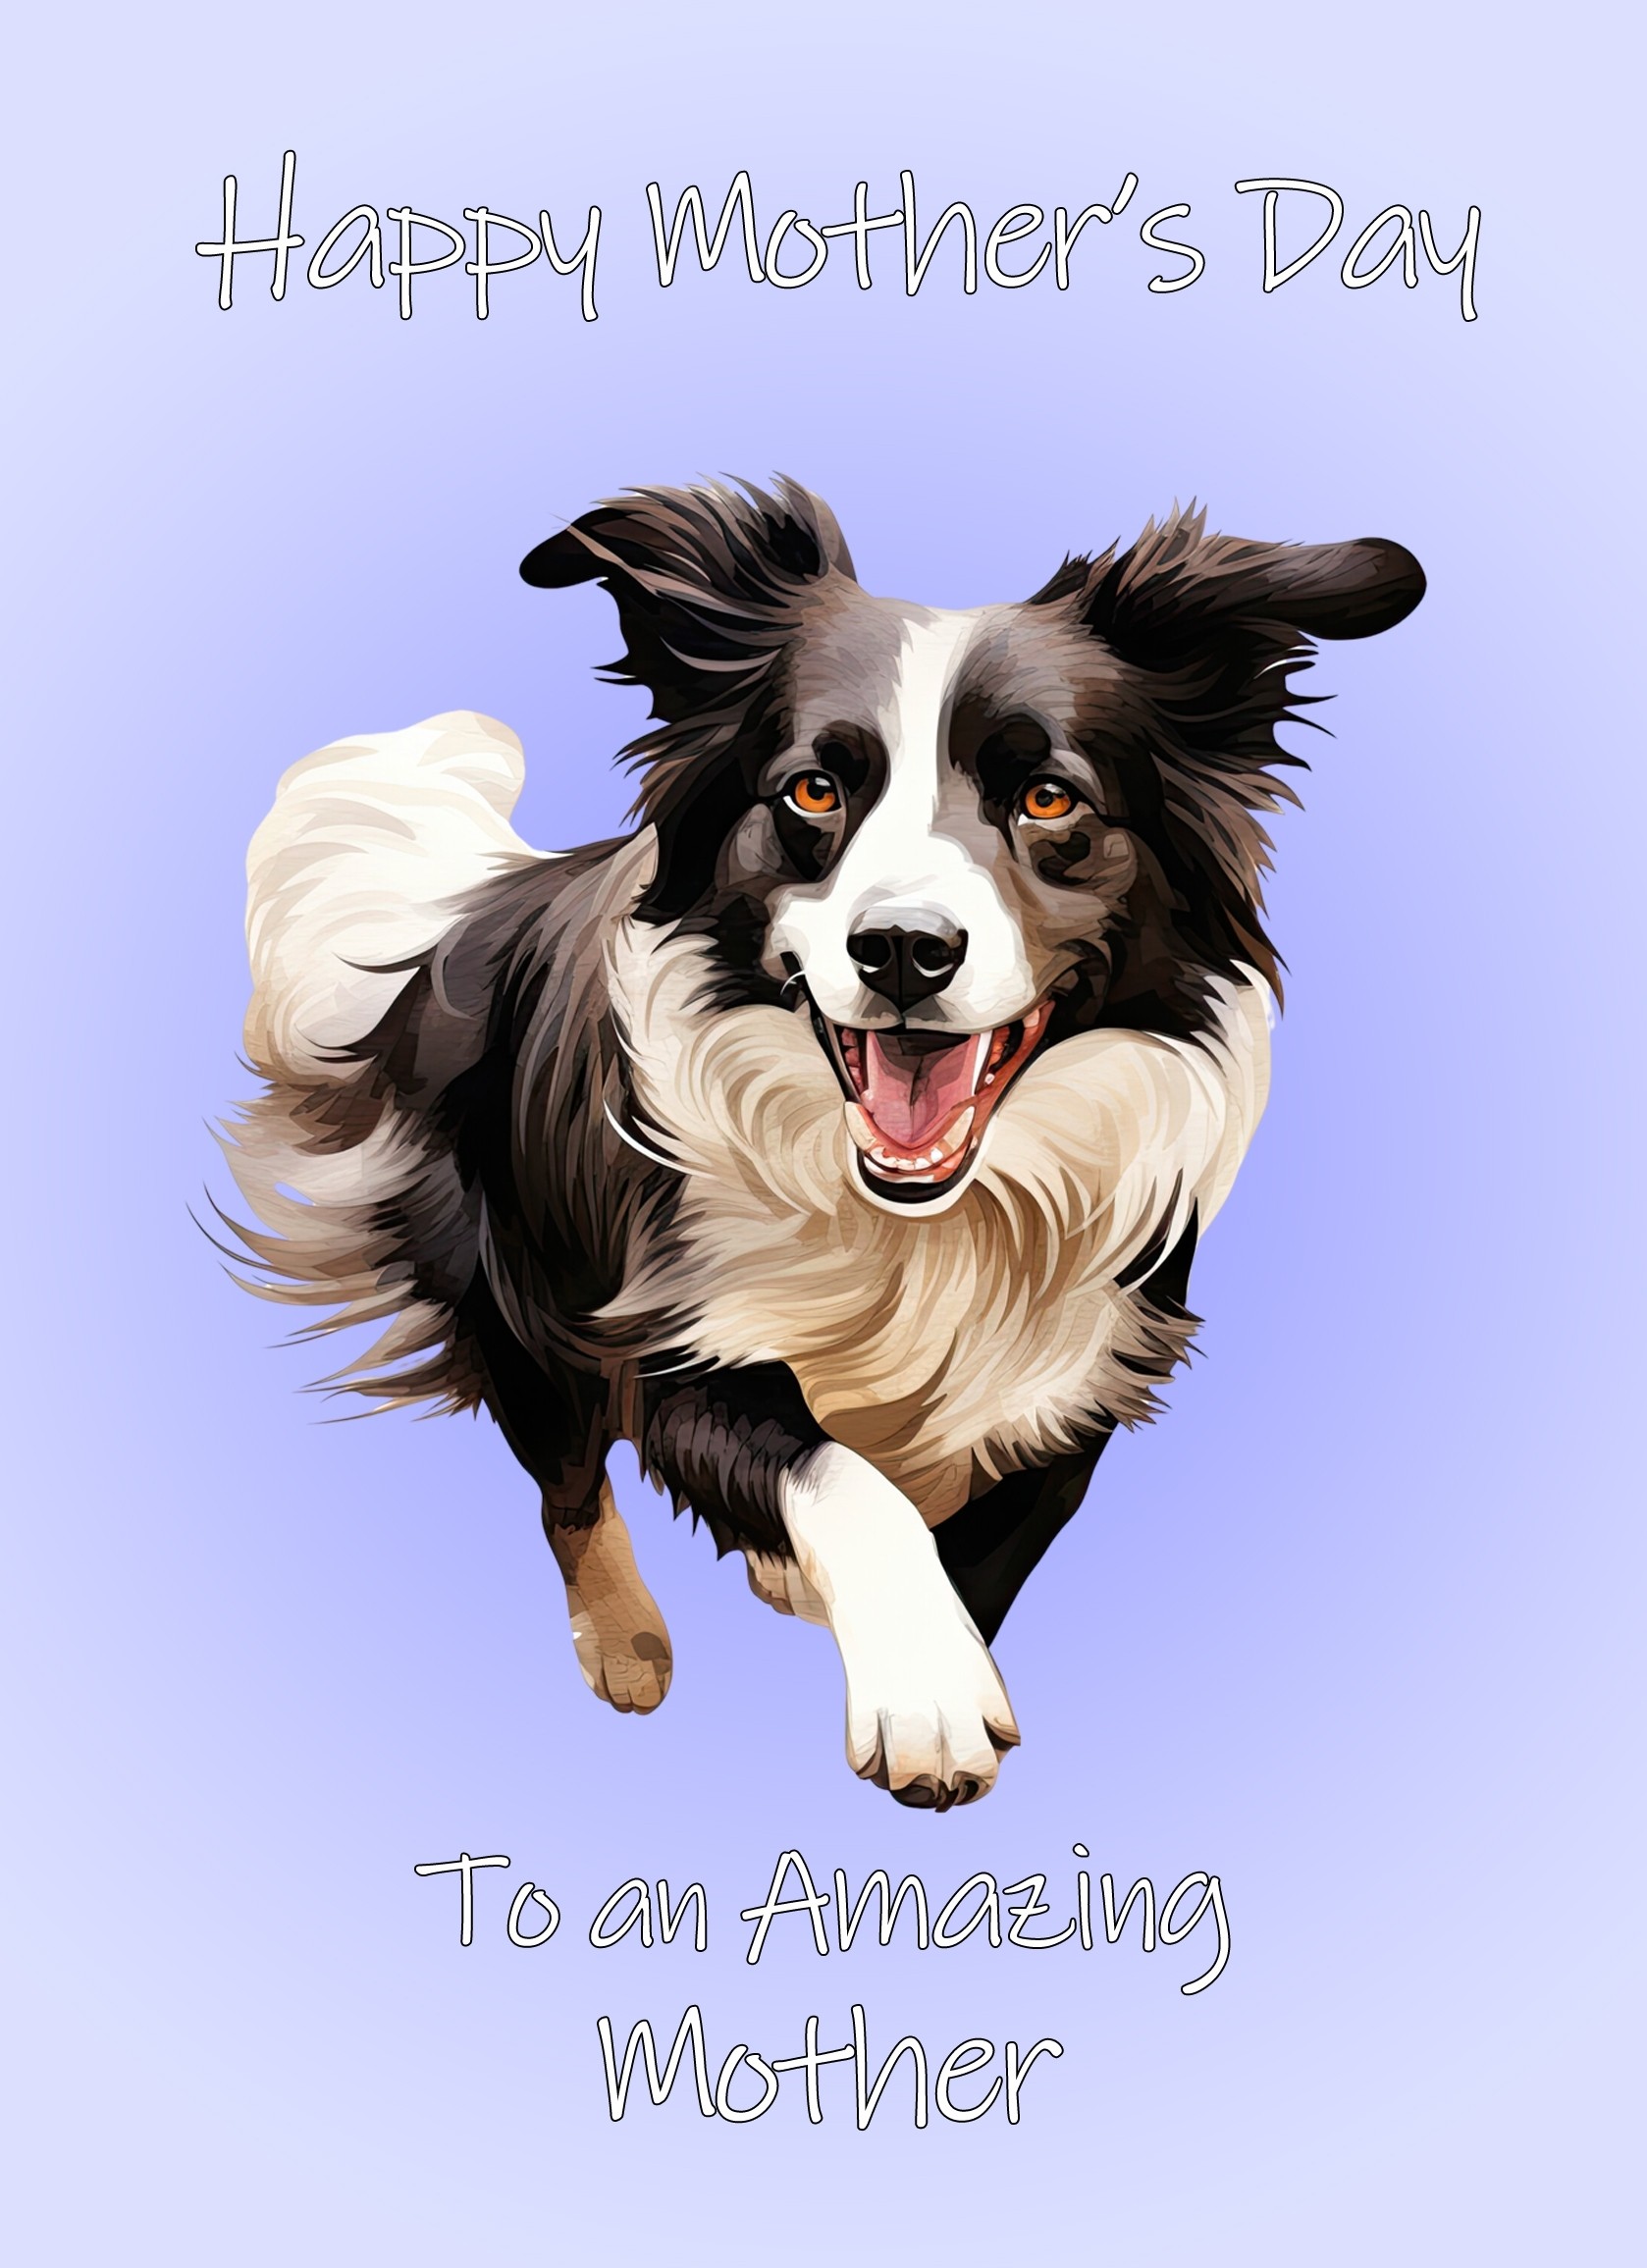 Border Collie Dog Mothers Day Card For Mother